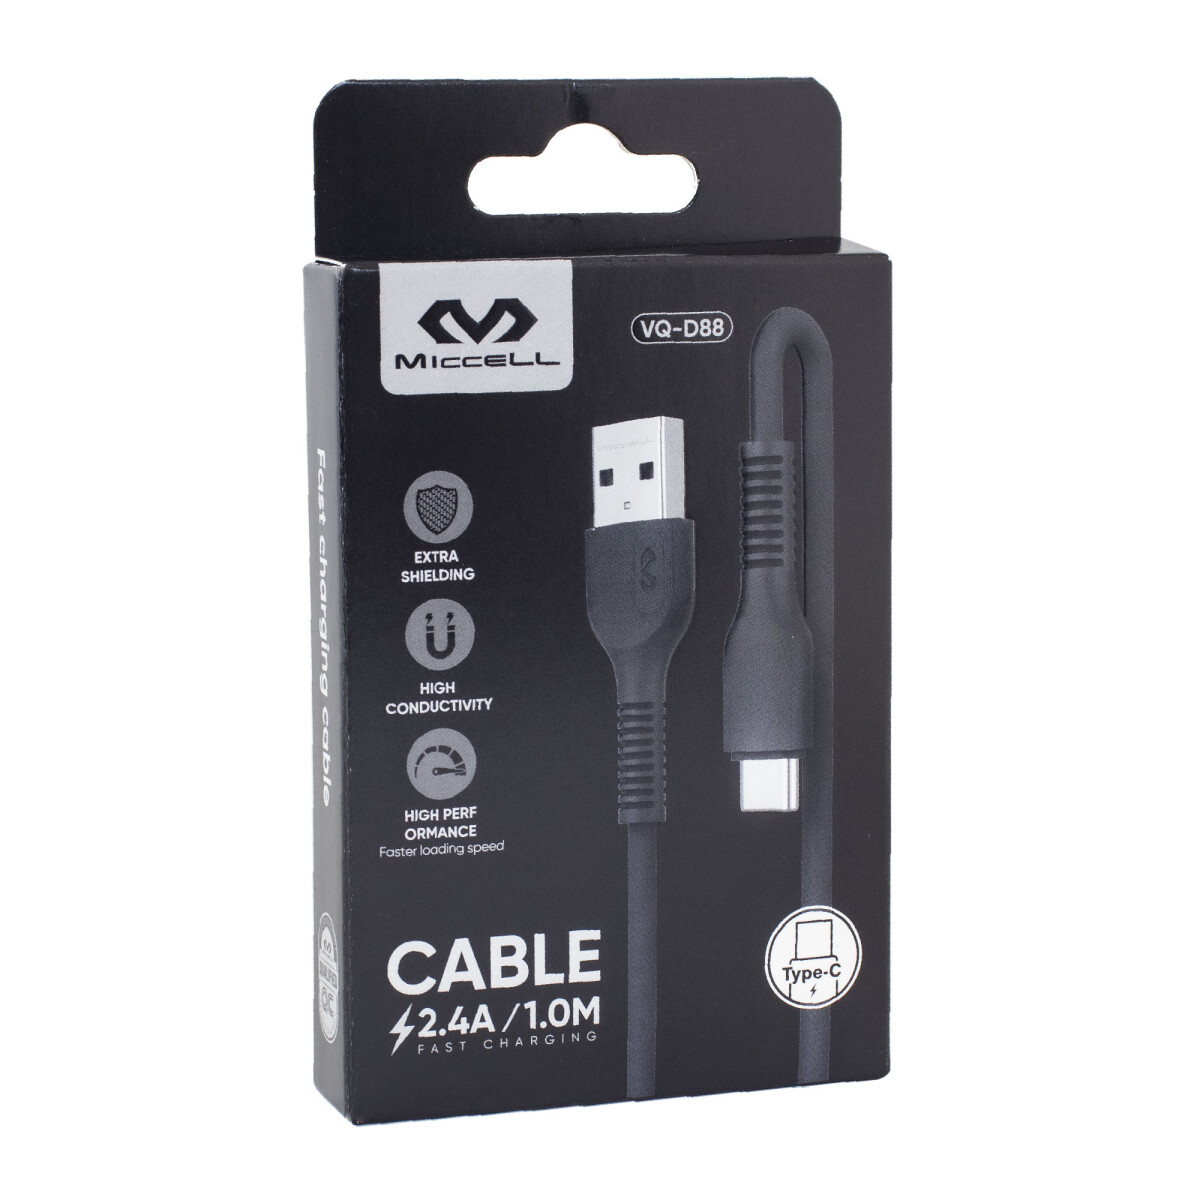 Cable Tipo C Miccell 2.4a 1.0m Negro 